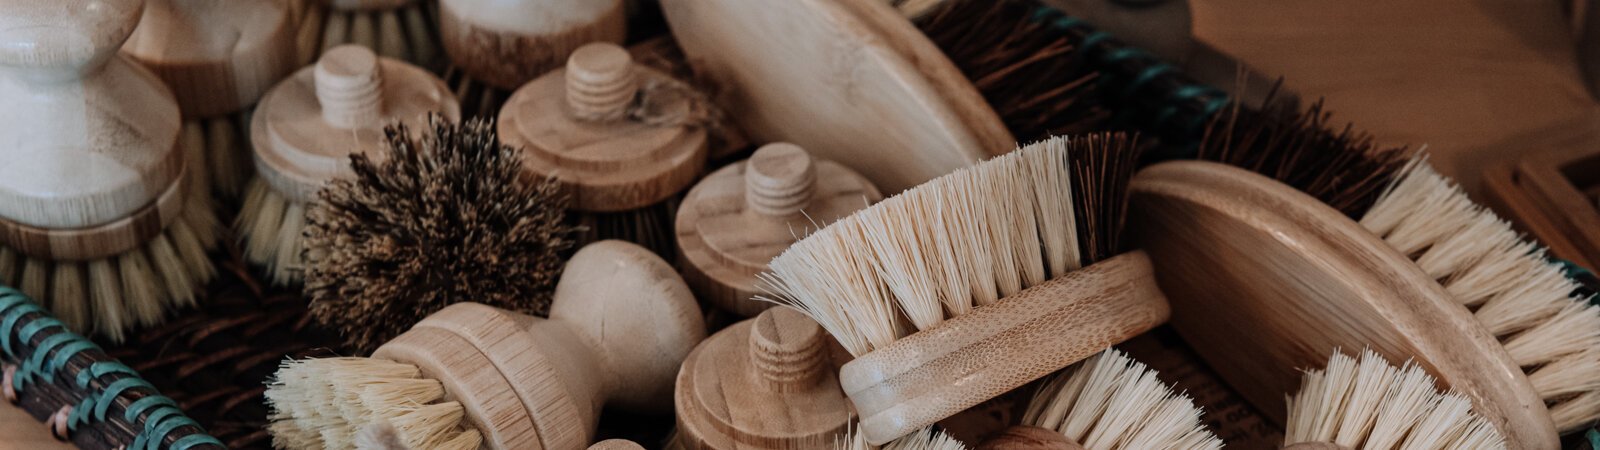 Scrub brush refill heads at Bottle Green Refillery, 2324 Crescent Ave, Fort Wayne, IN.